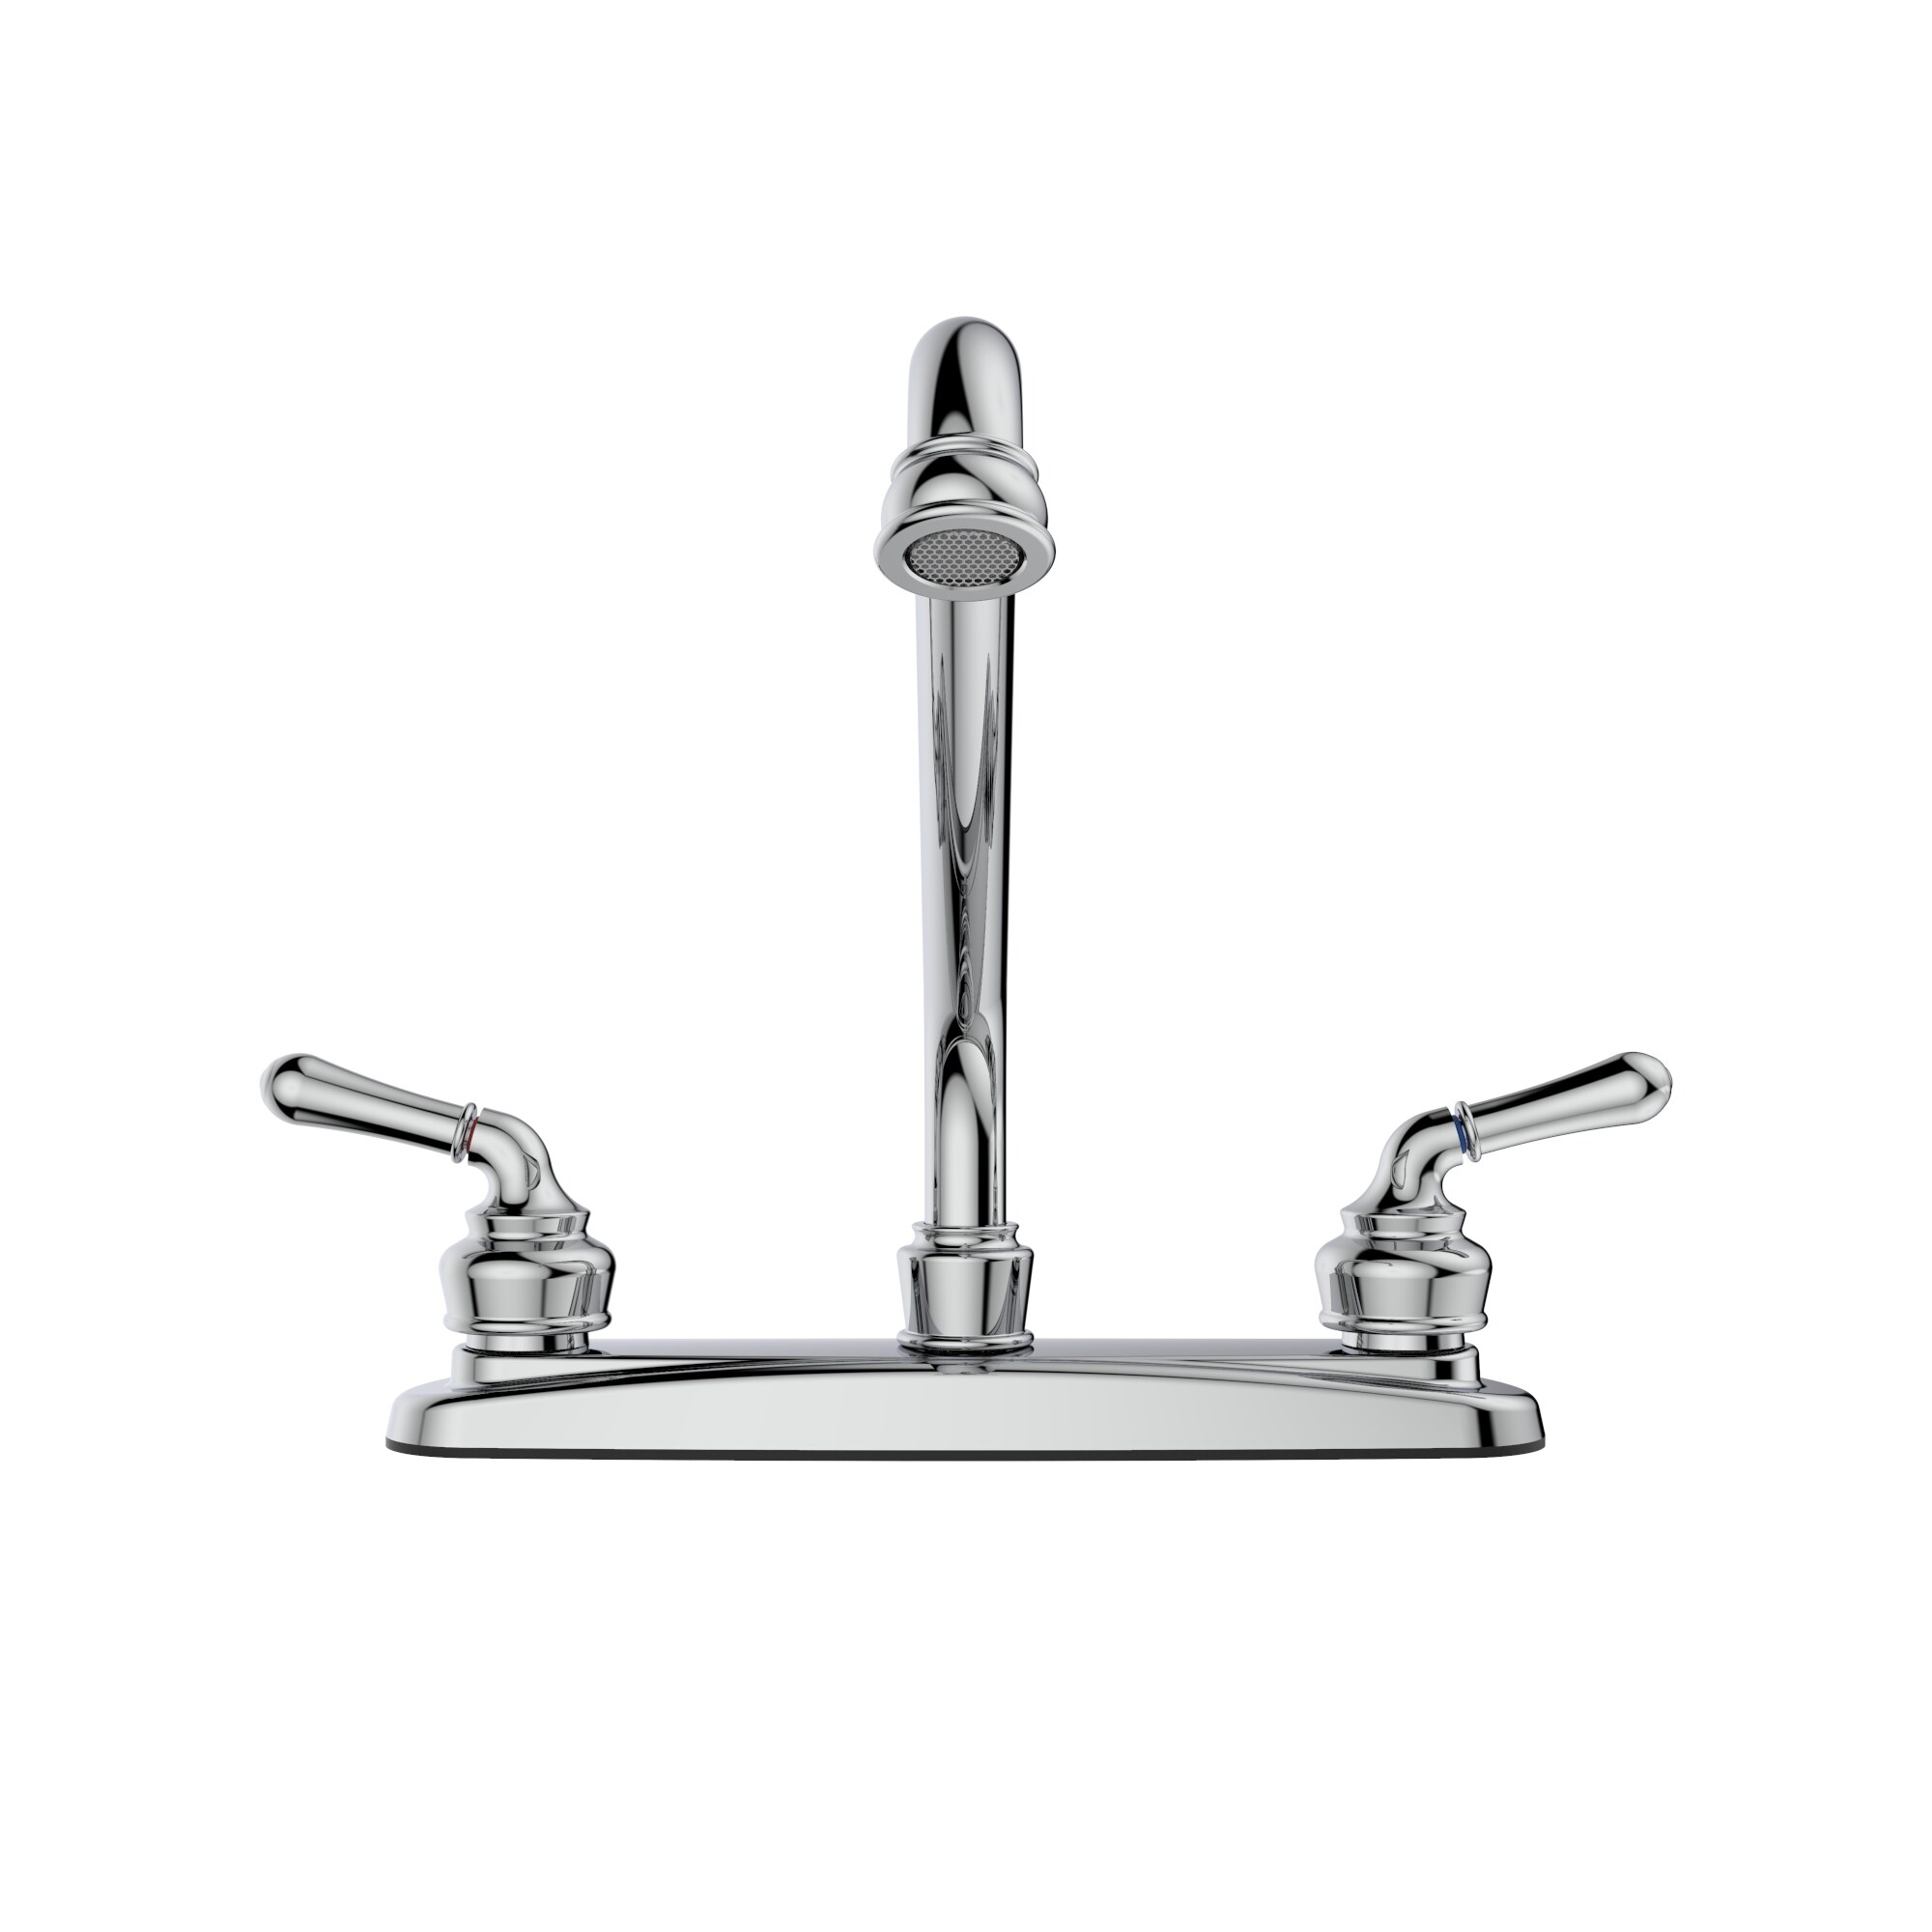 Belanger 21 Series Polished Chrome 2-handle Low-arc Kitchen Faucet (Deck Plate Included)